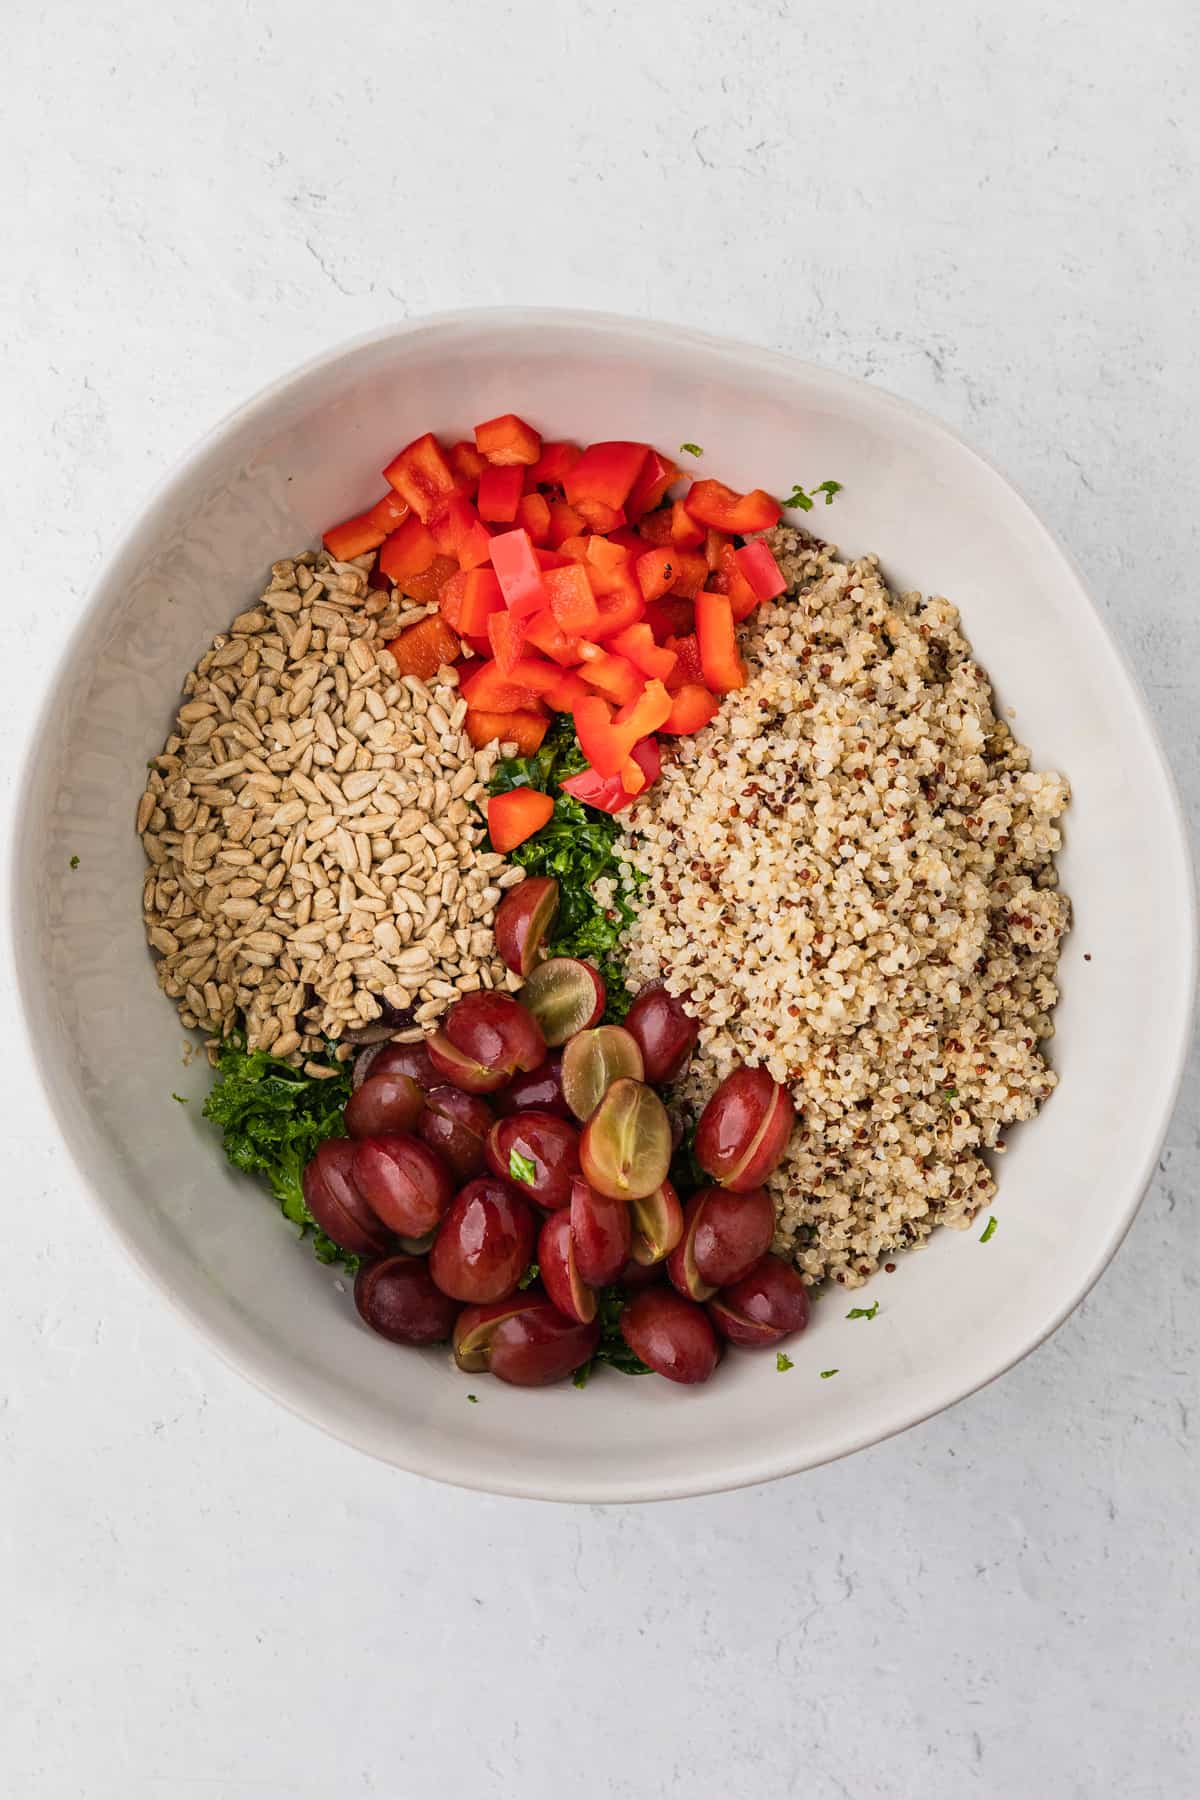 a bowl with salad ingredients: quinoa, grapes, sunflower seeds, kale, red pepper